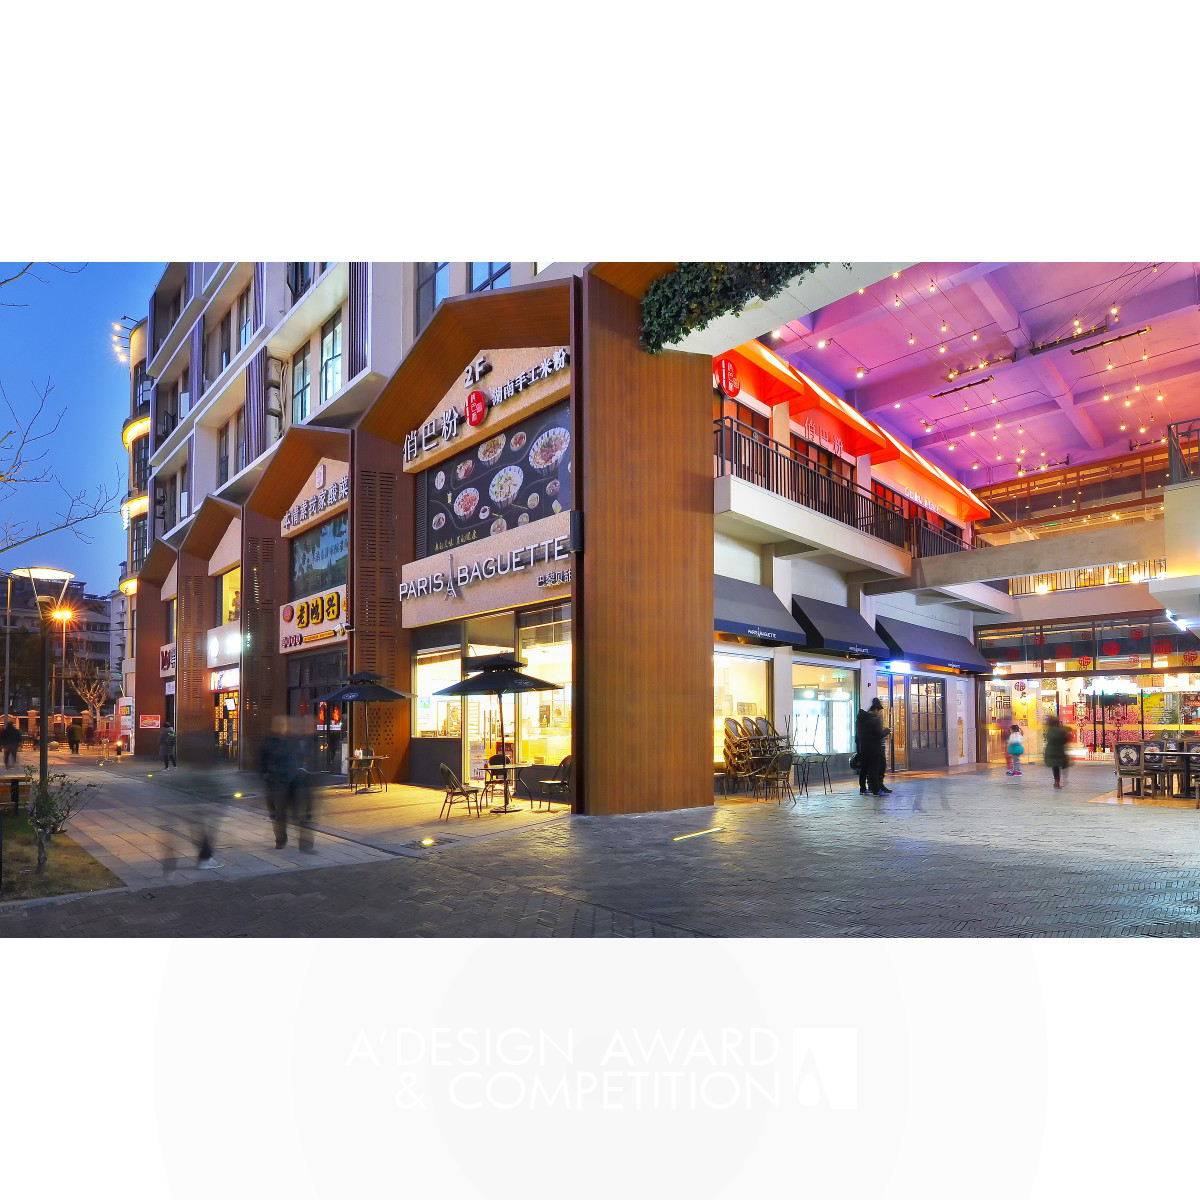 Pan Mok Food mall and residential